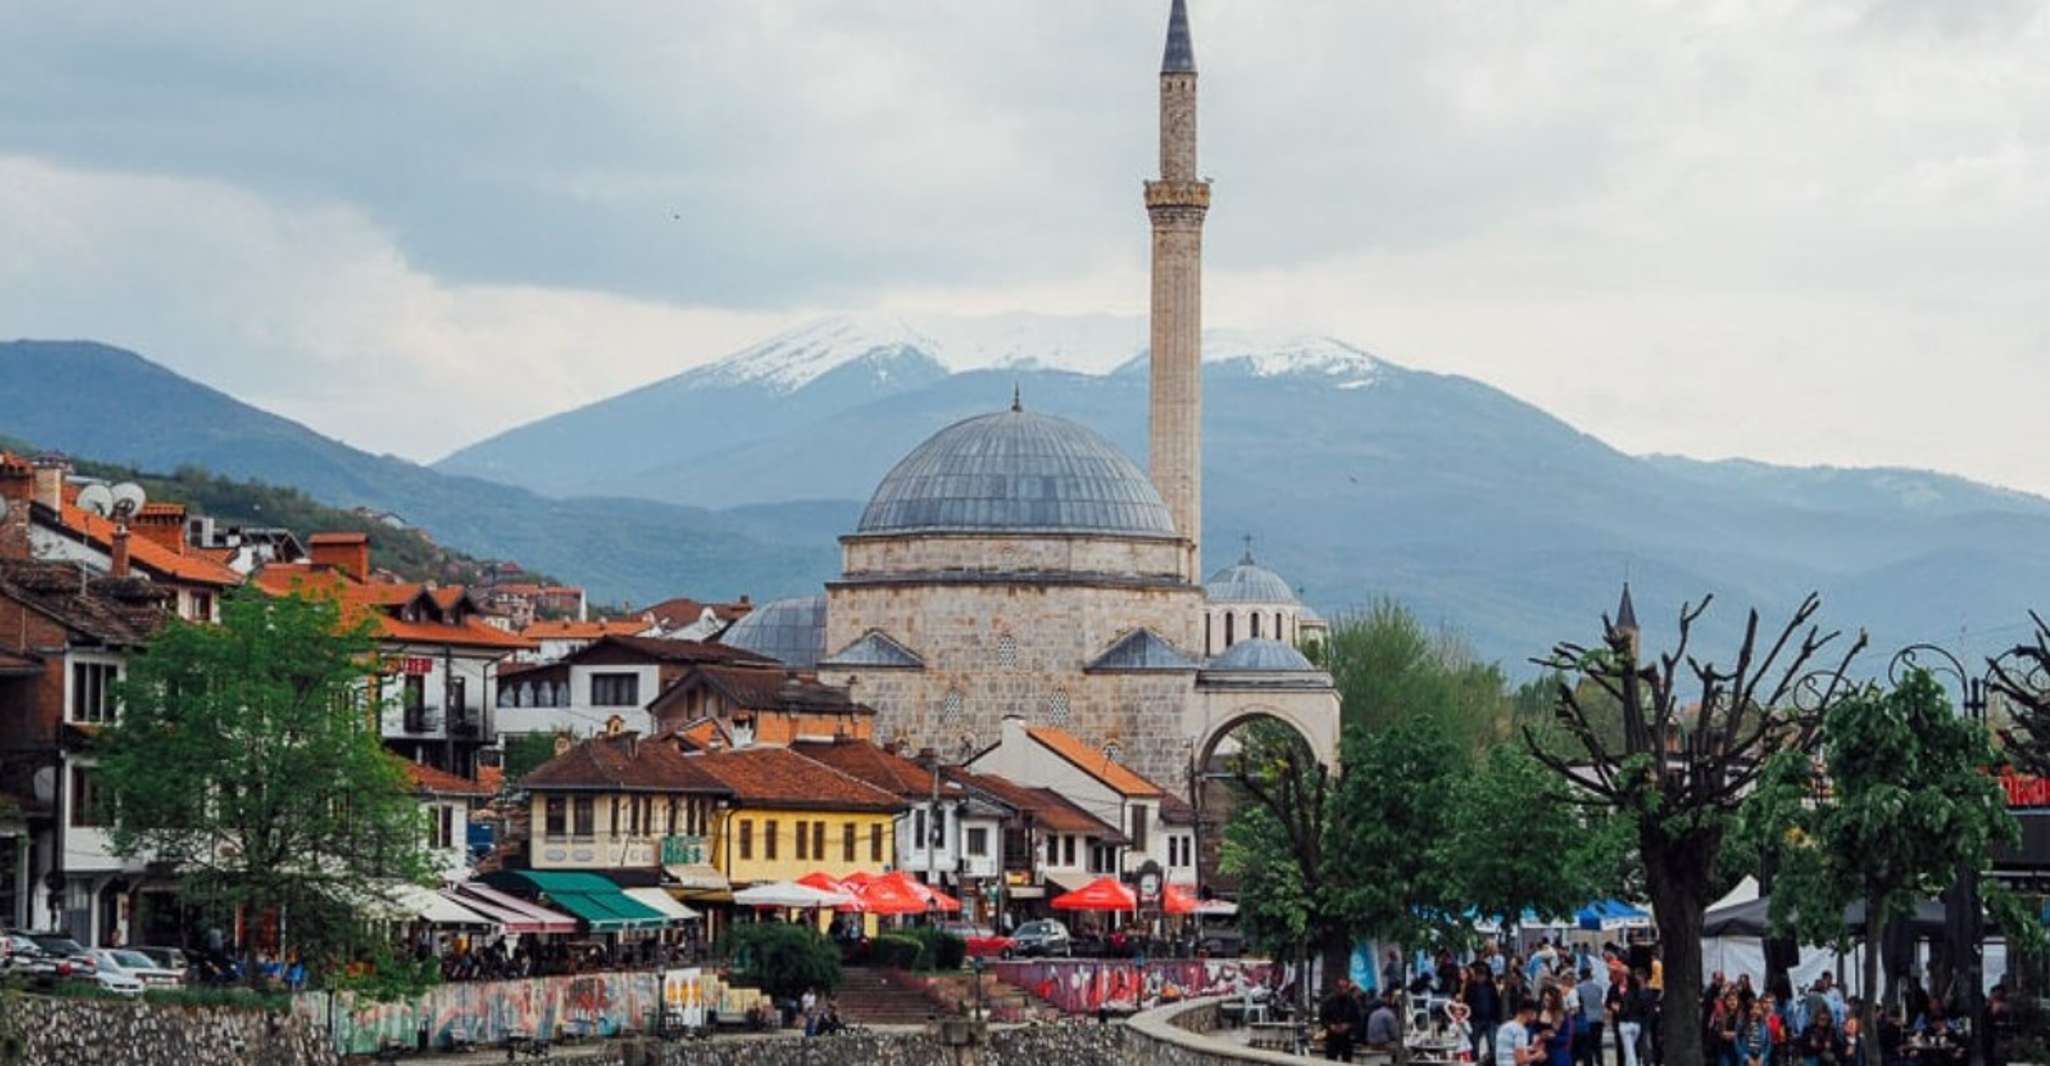 A Day of Cultural Discovery, Prizren and Prishtina Tour